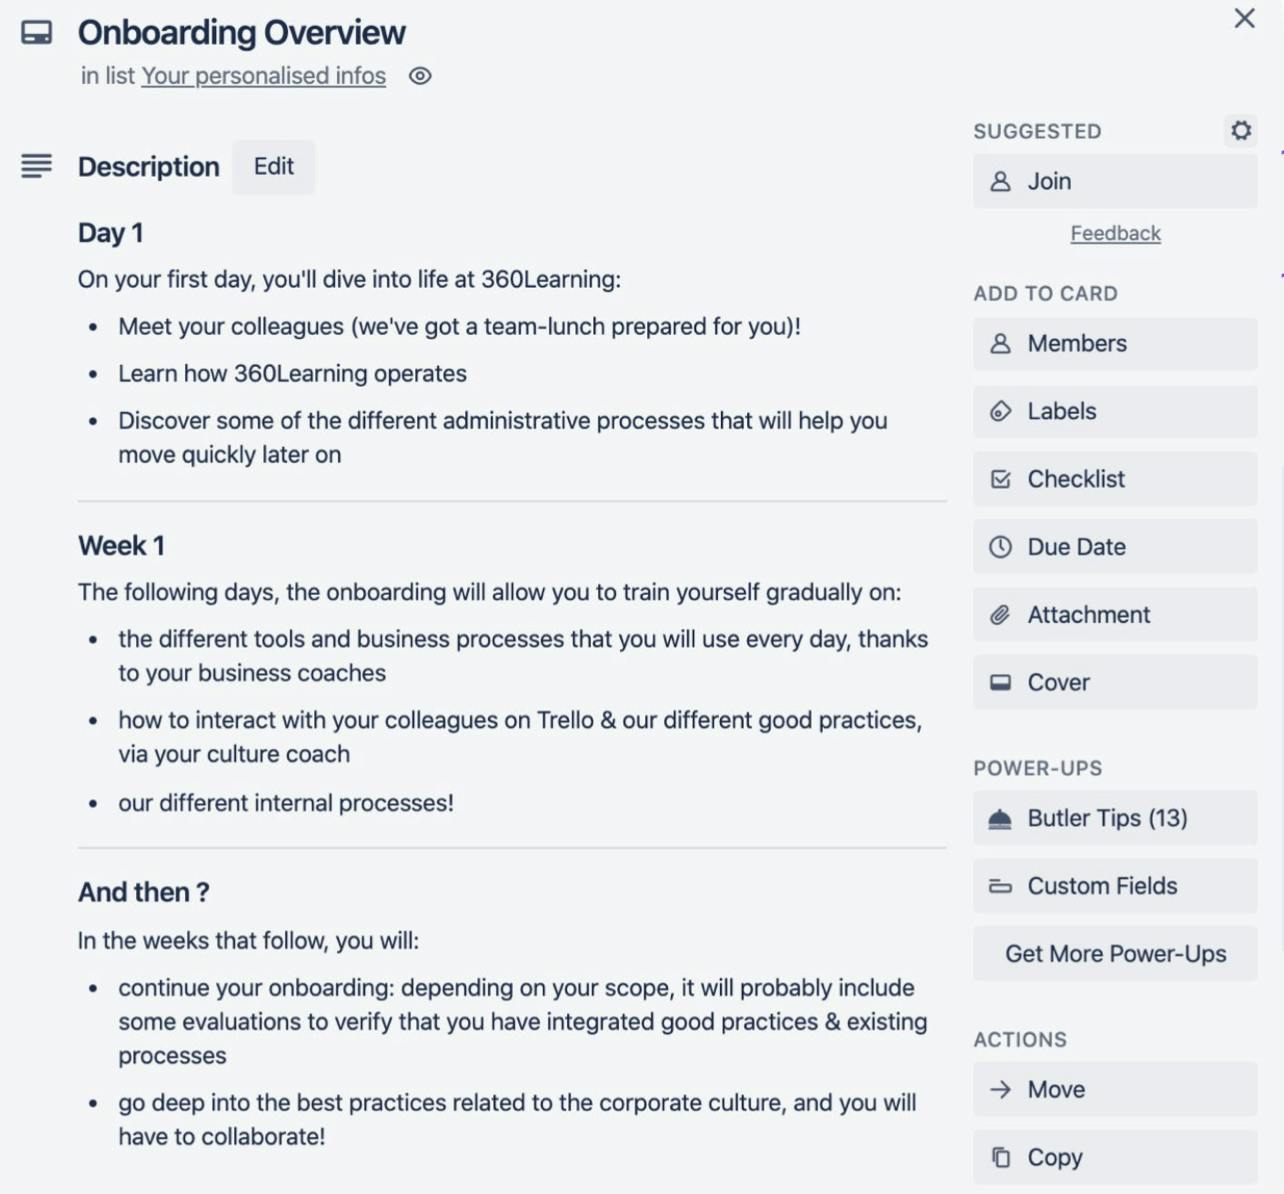 Onboarding overview